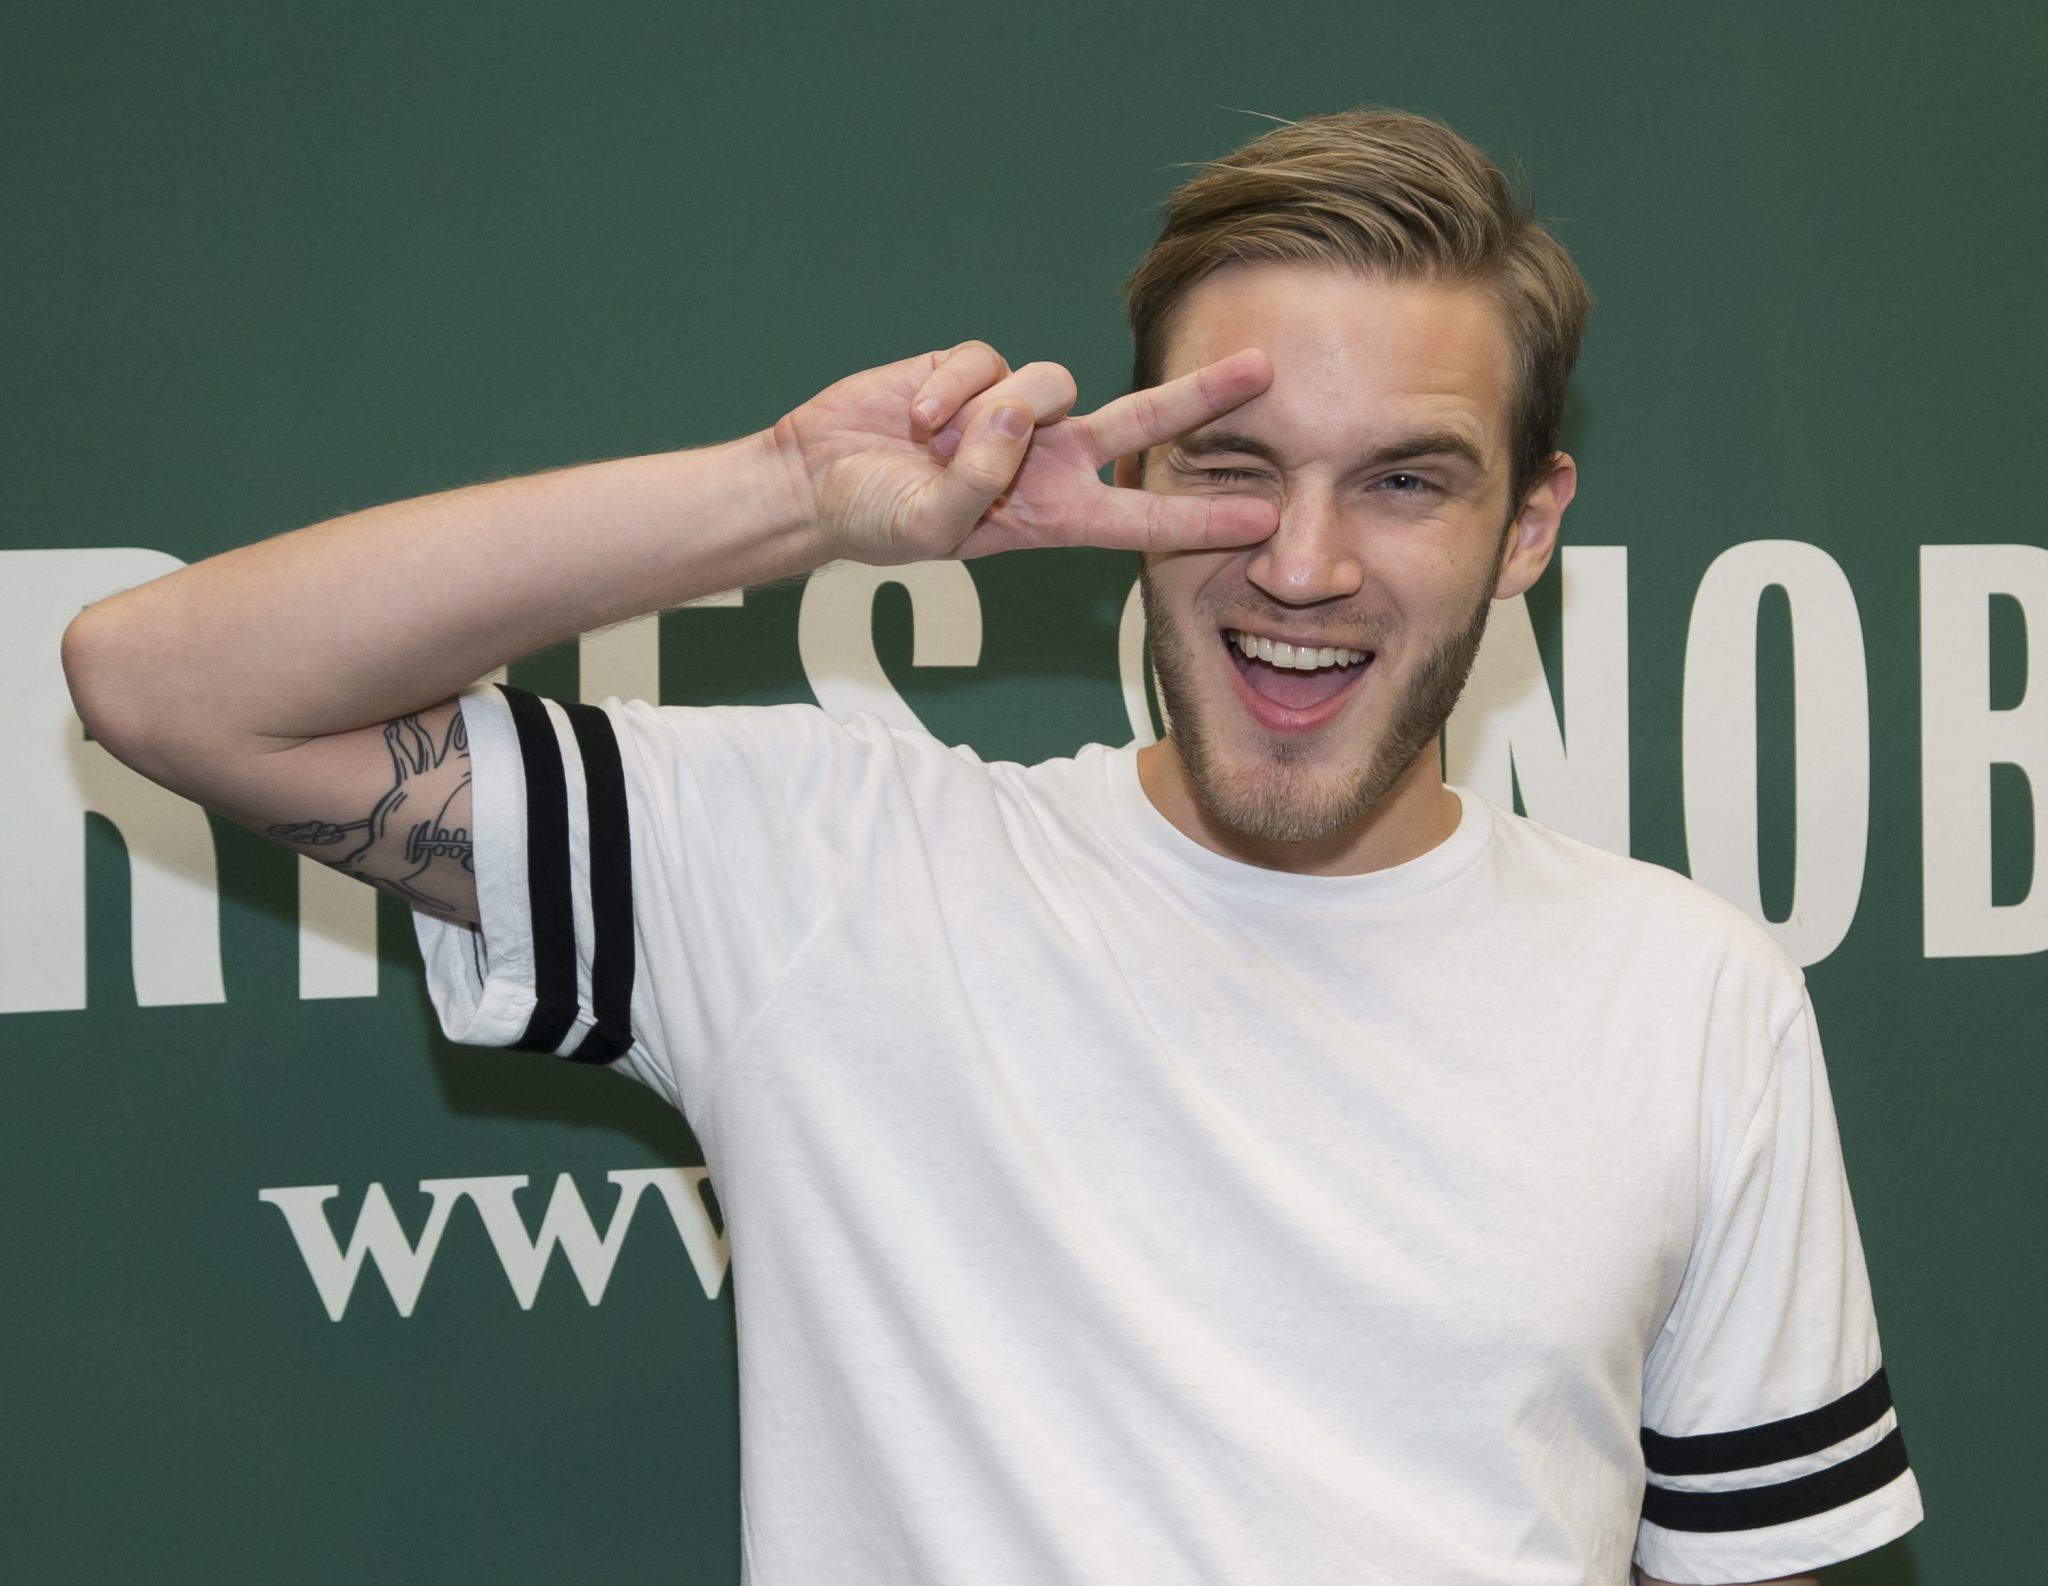 LOS ANGELES, CA - OCTOBER 30: Comedian PewDiePie signs his new book "This Book Loves You" at Barnes & Noble at The Grove on October 30, 2015 in Los Angeles, California. (Photo by Vincent Sandoval/WireImage)